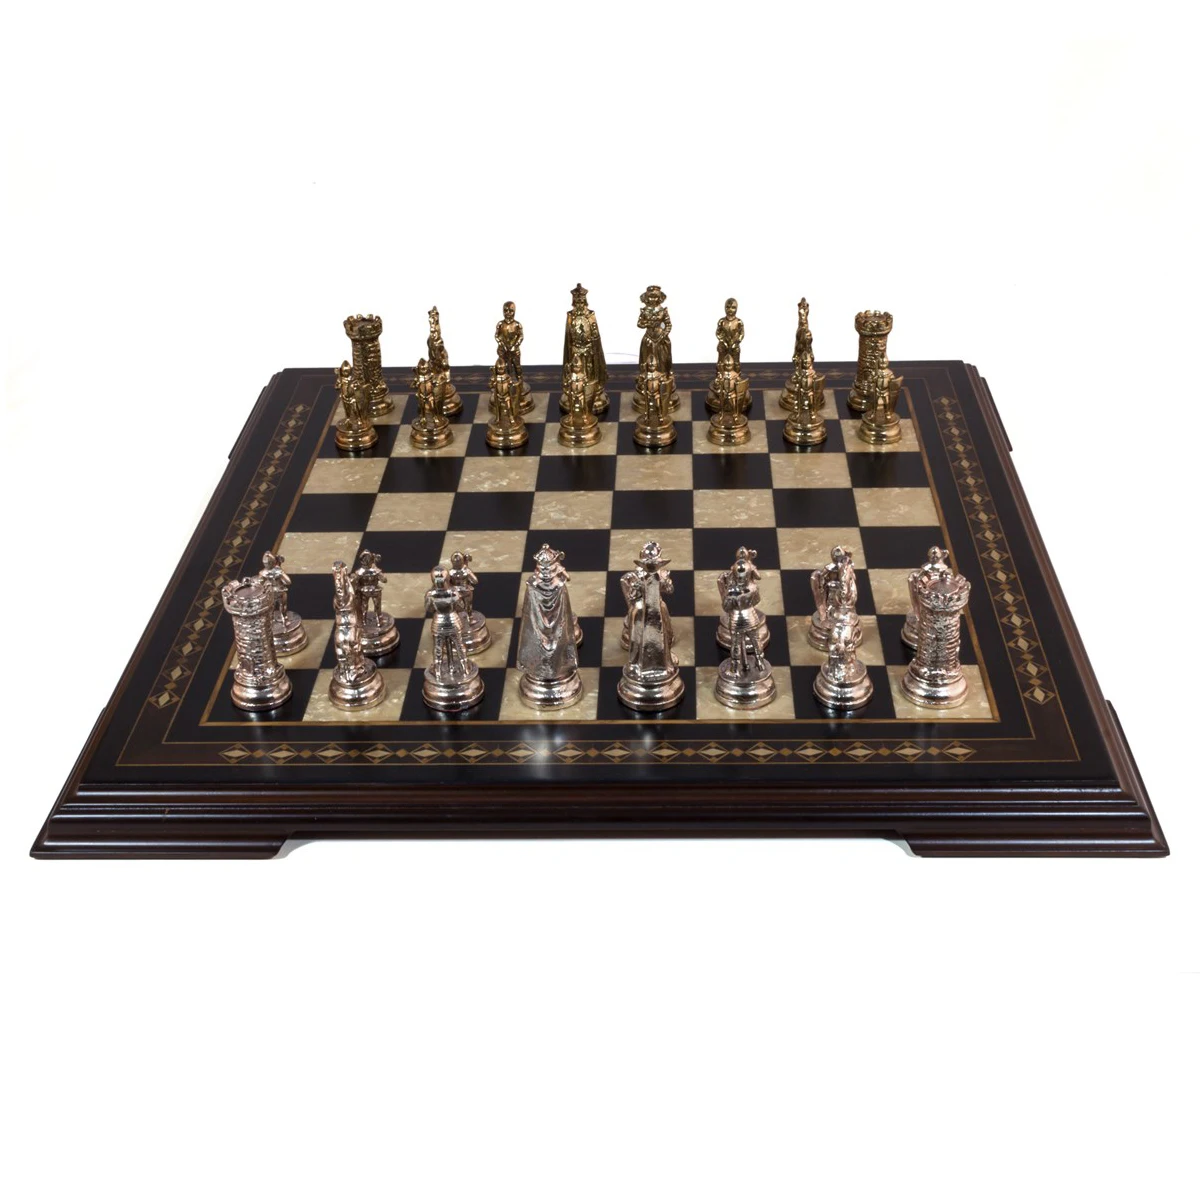 22.5'' Flat Footed Black Chessboard - Solid Beech Wood Mosaic Engraved Chess Board Game Gift Items Deck Box Checkers Шахматы шахматы оценка позиции и план карпов а